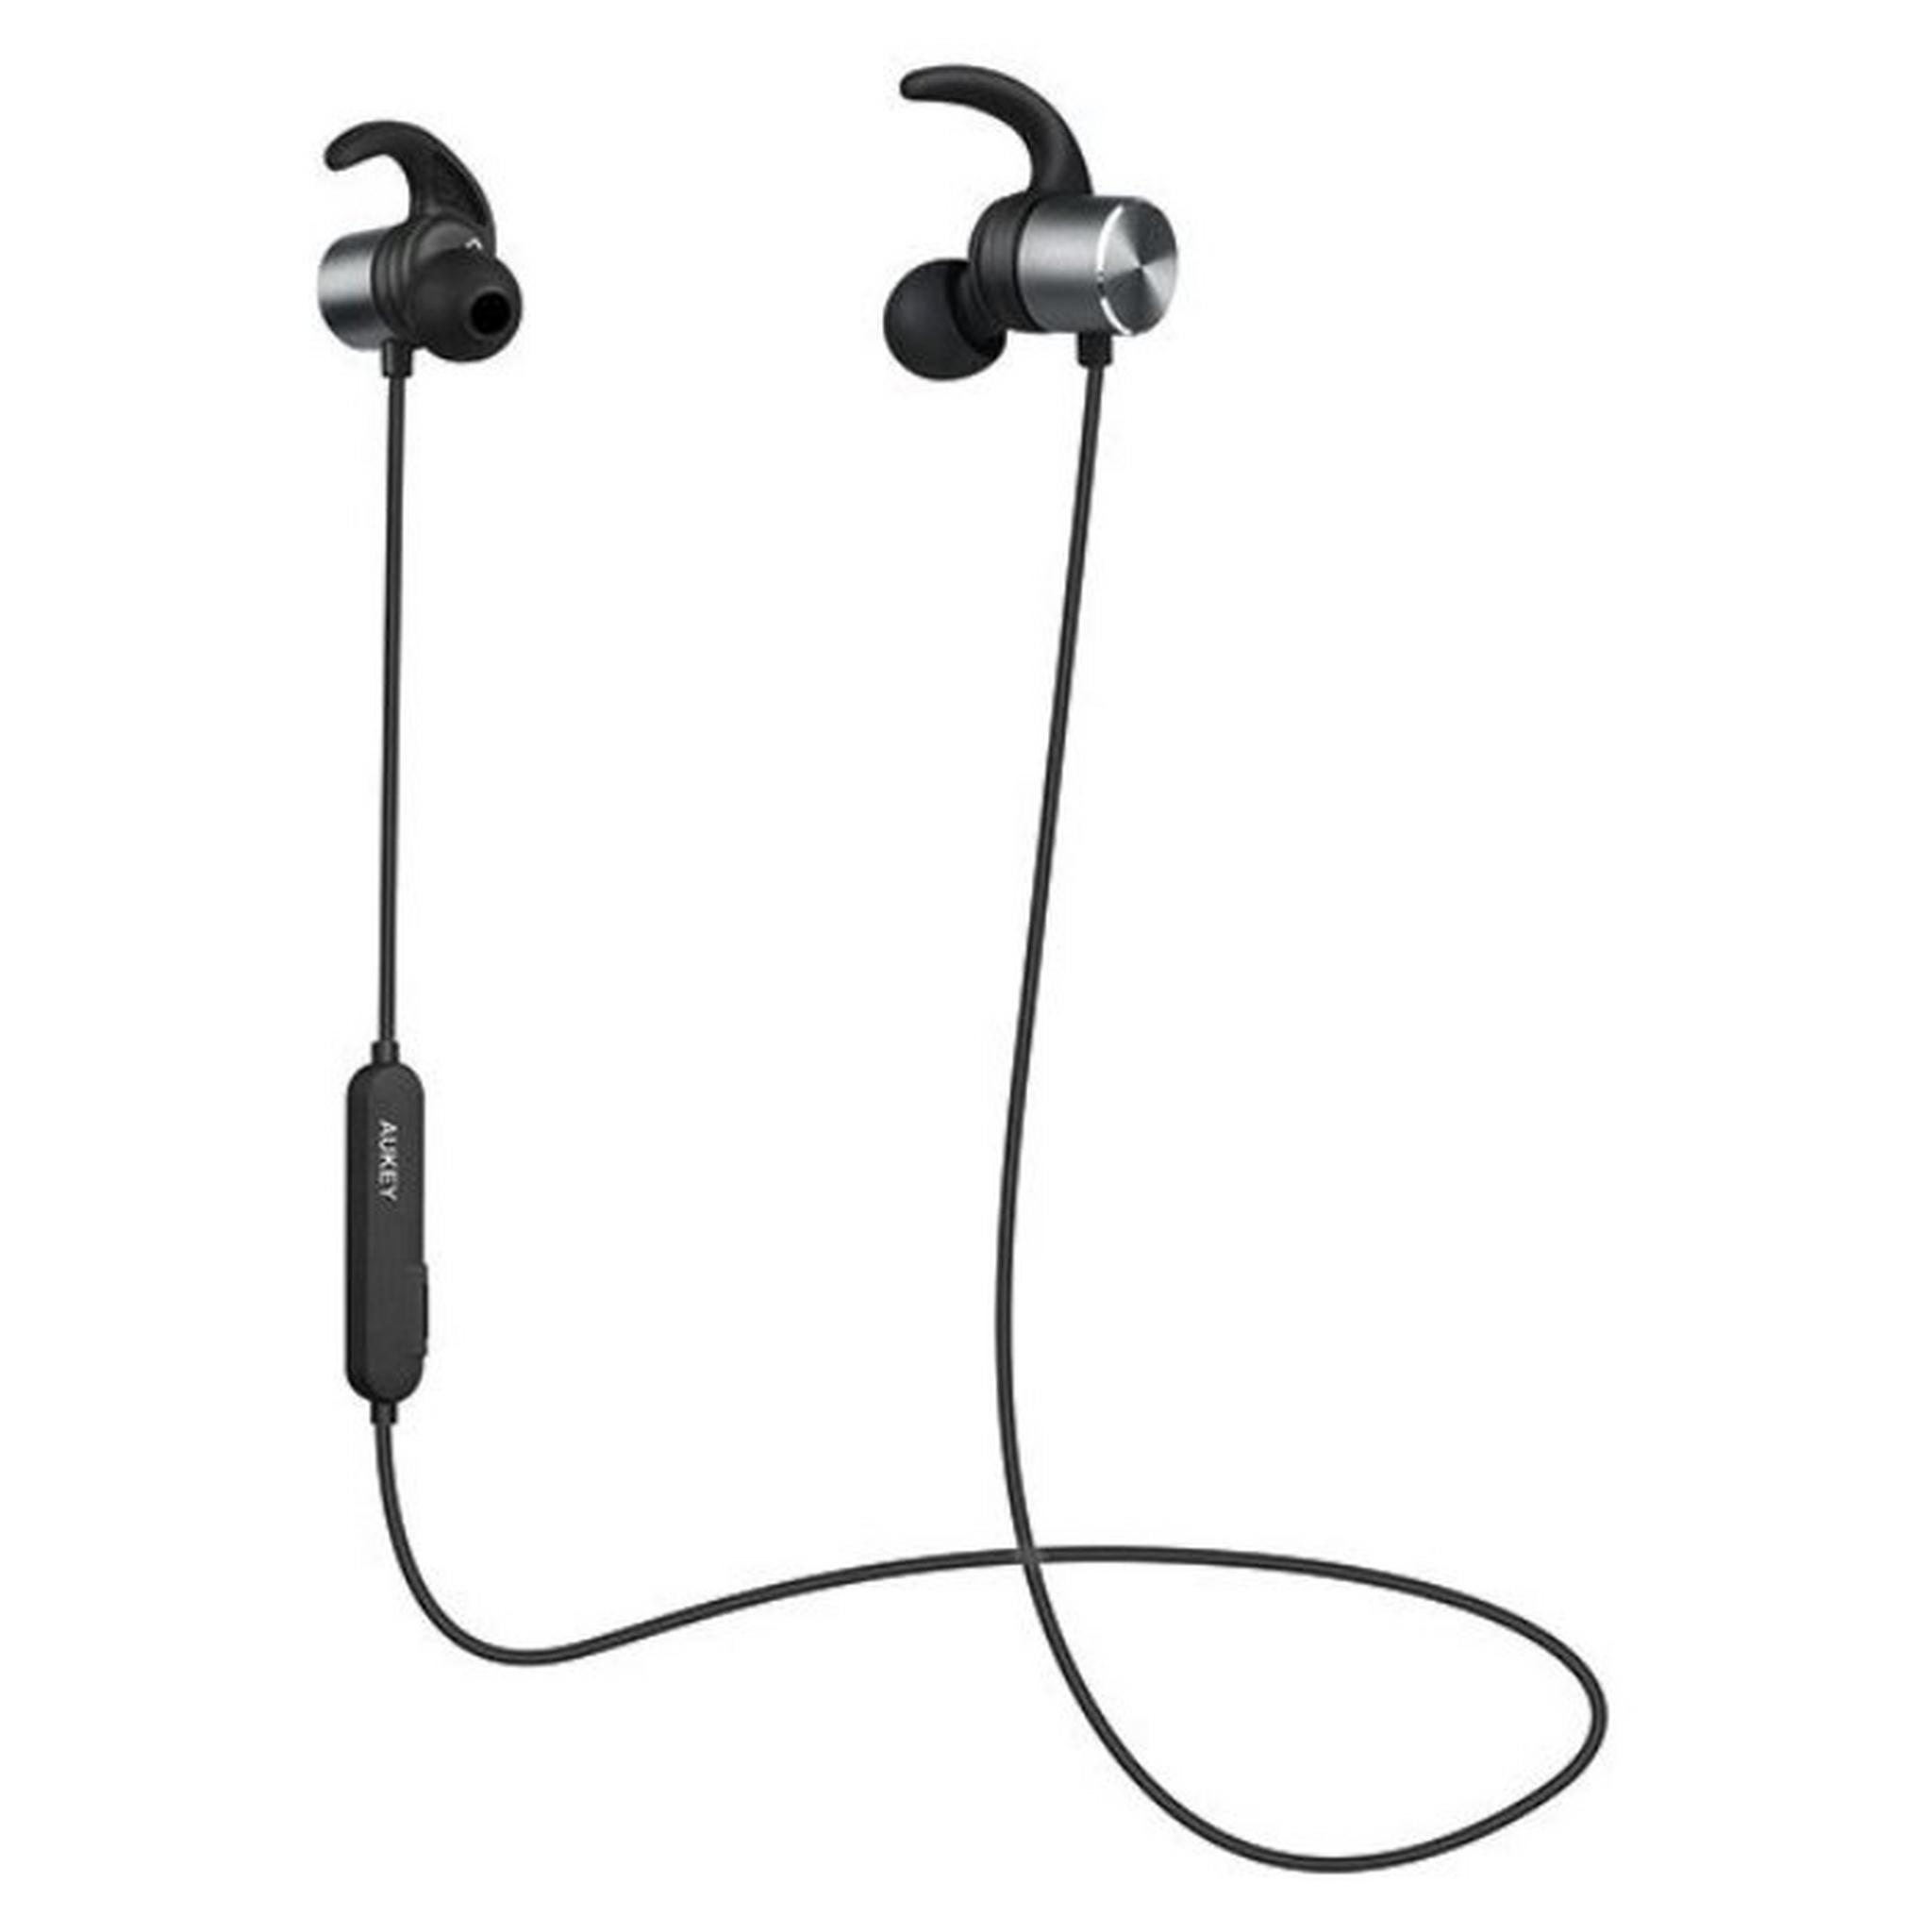 Aukey Magnetic Wireless Earbuds - Black